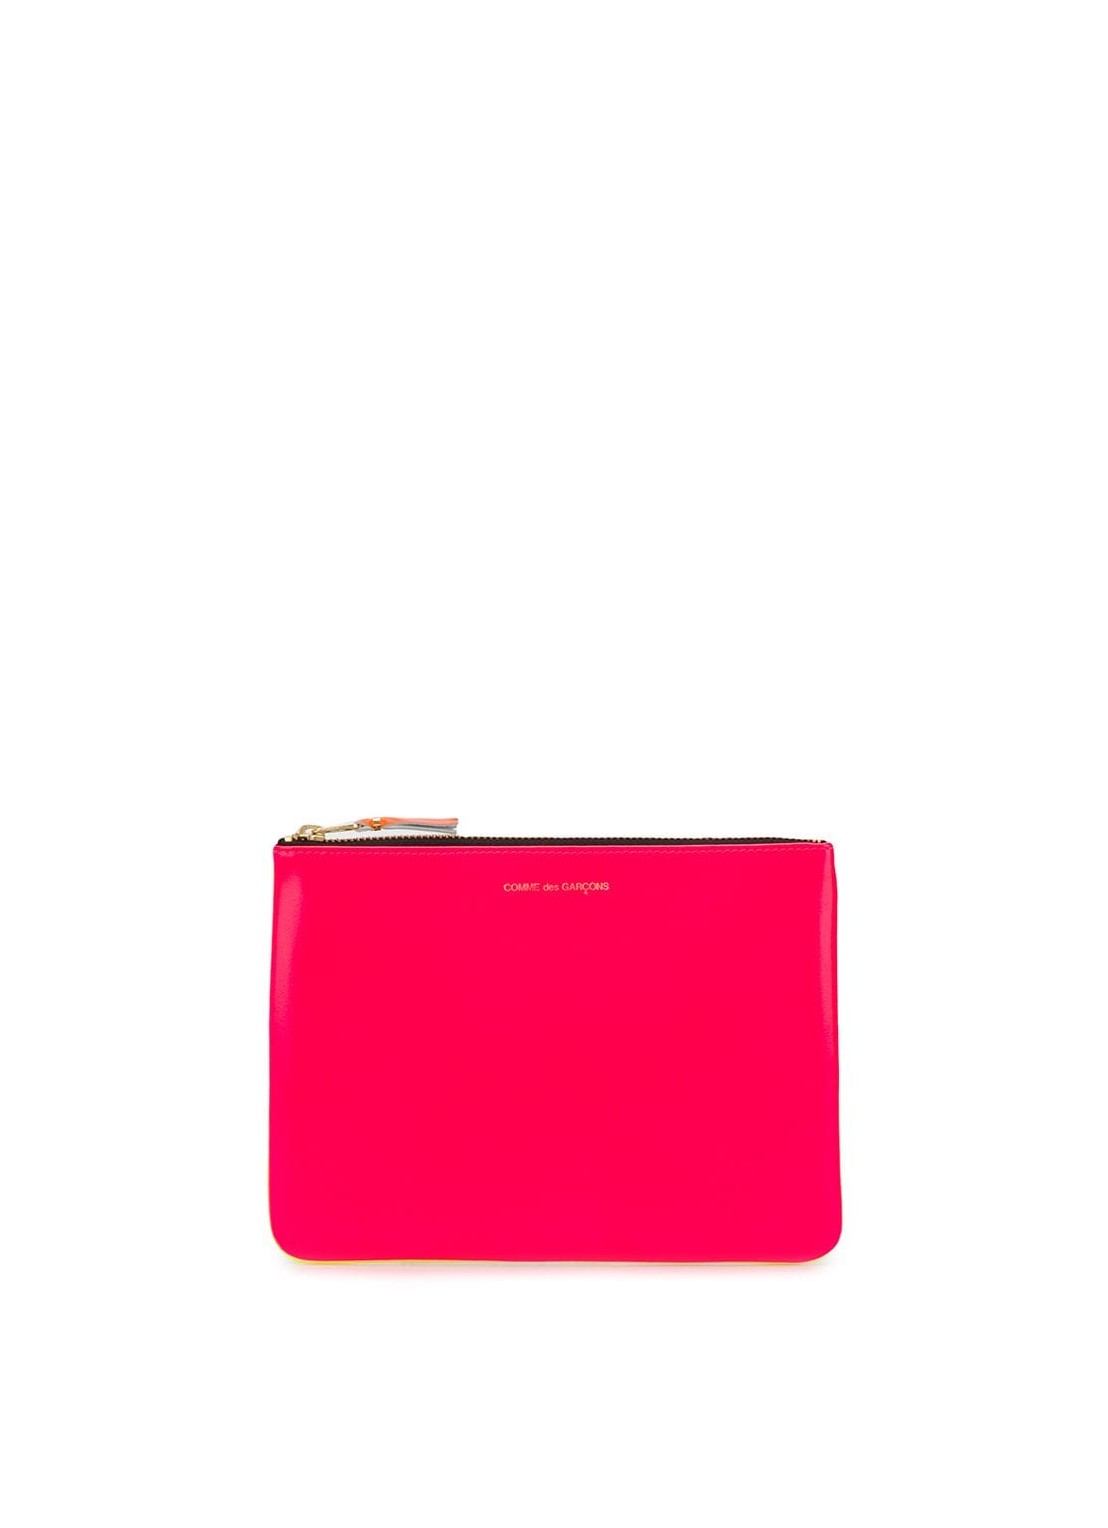 Cartera comme des garcons wallet man super fluo leather line sa5100sf pink yellow talla rosa
 